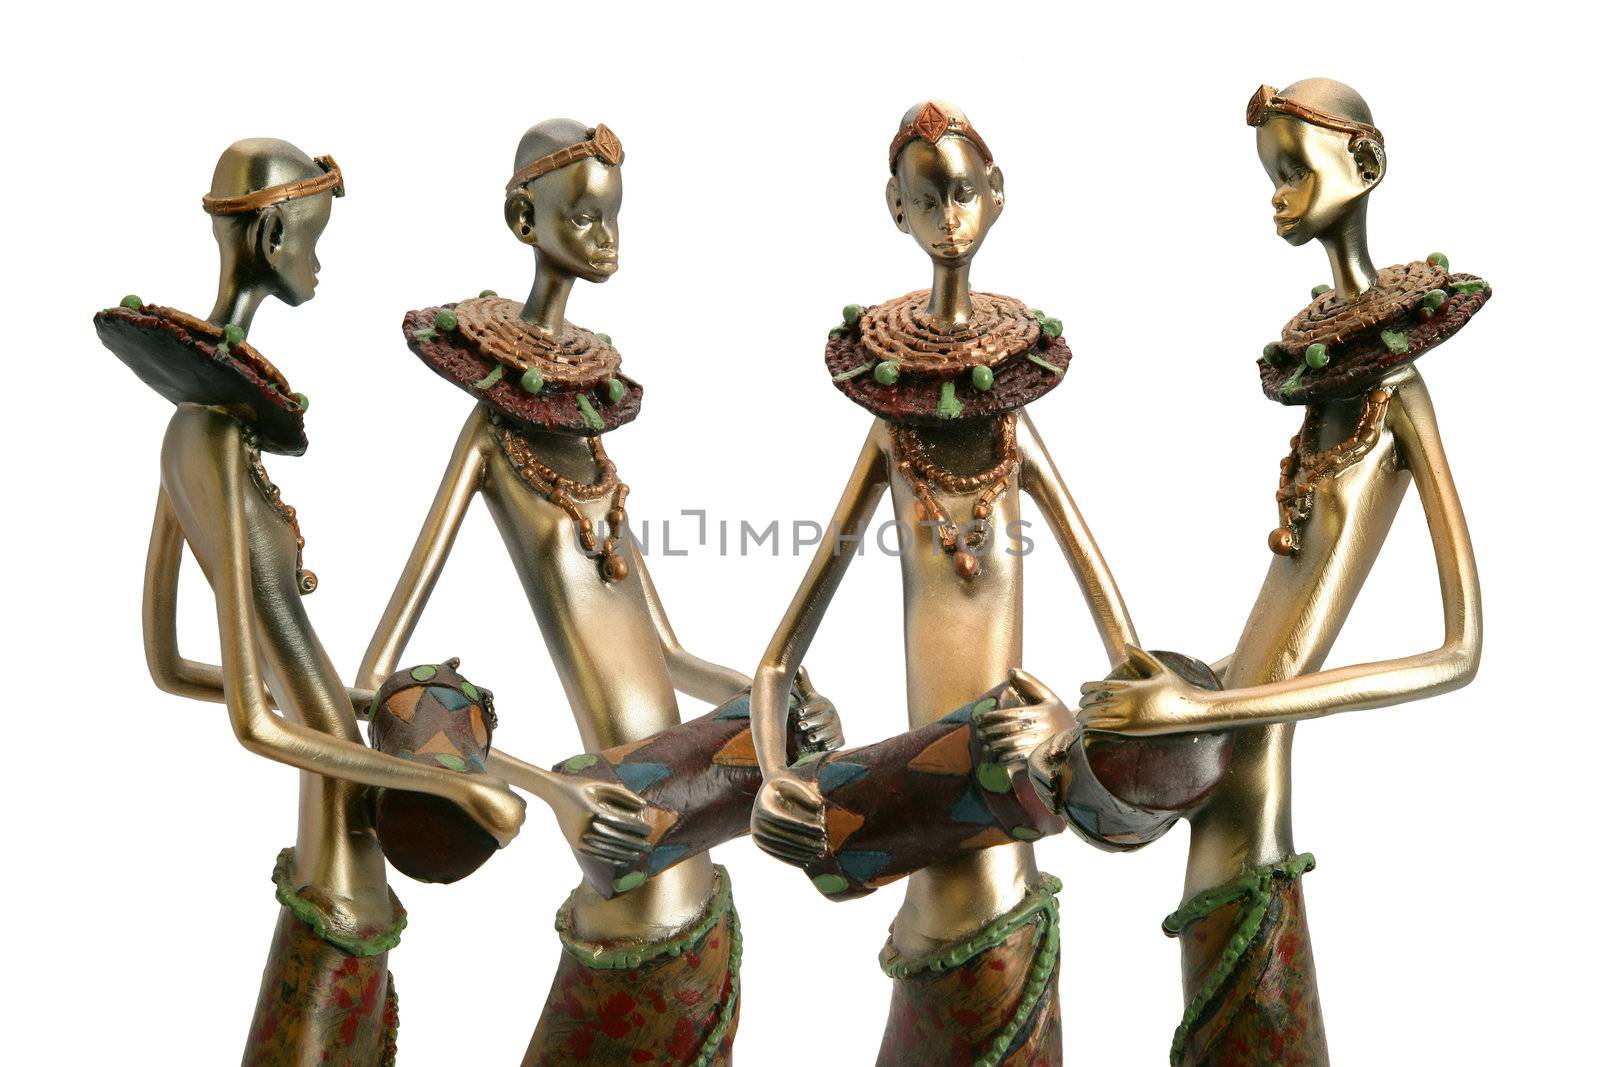 African figurines holding drums by phovoir